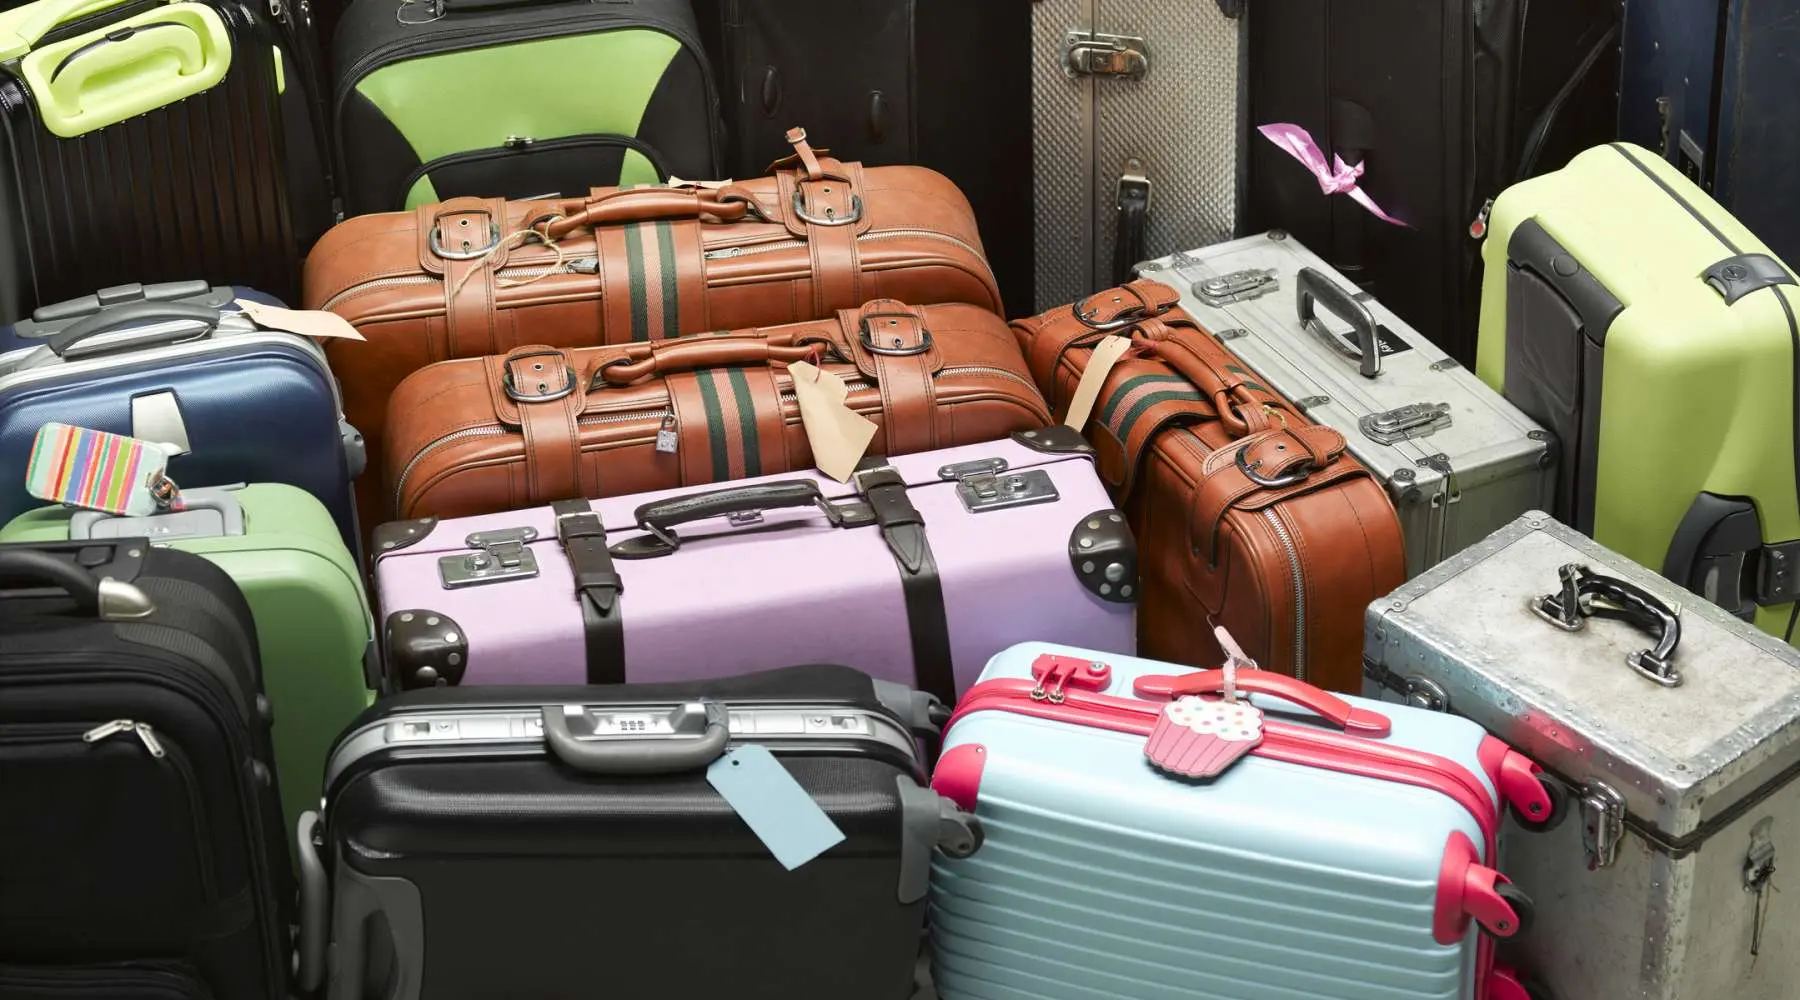 Lots of suitcases